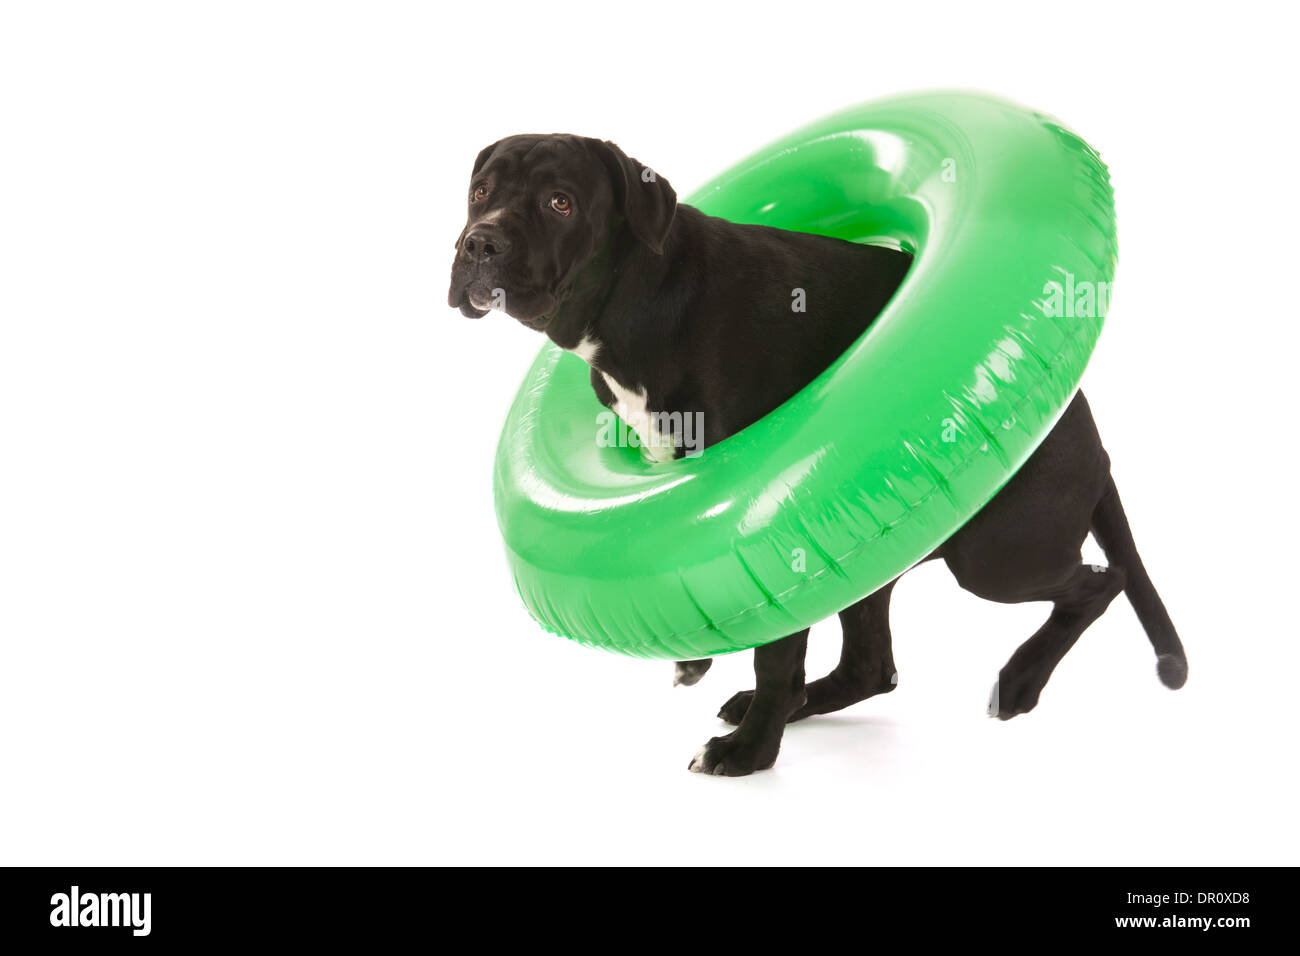 dog on vacation with green inflatable swimming tool Stock Photo